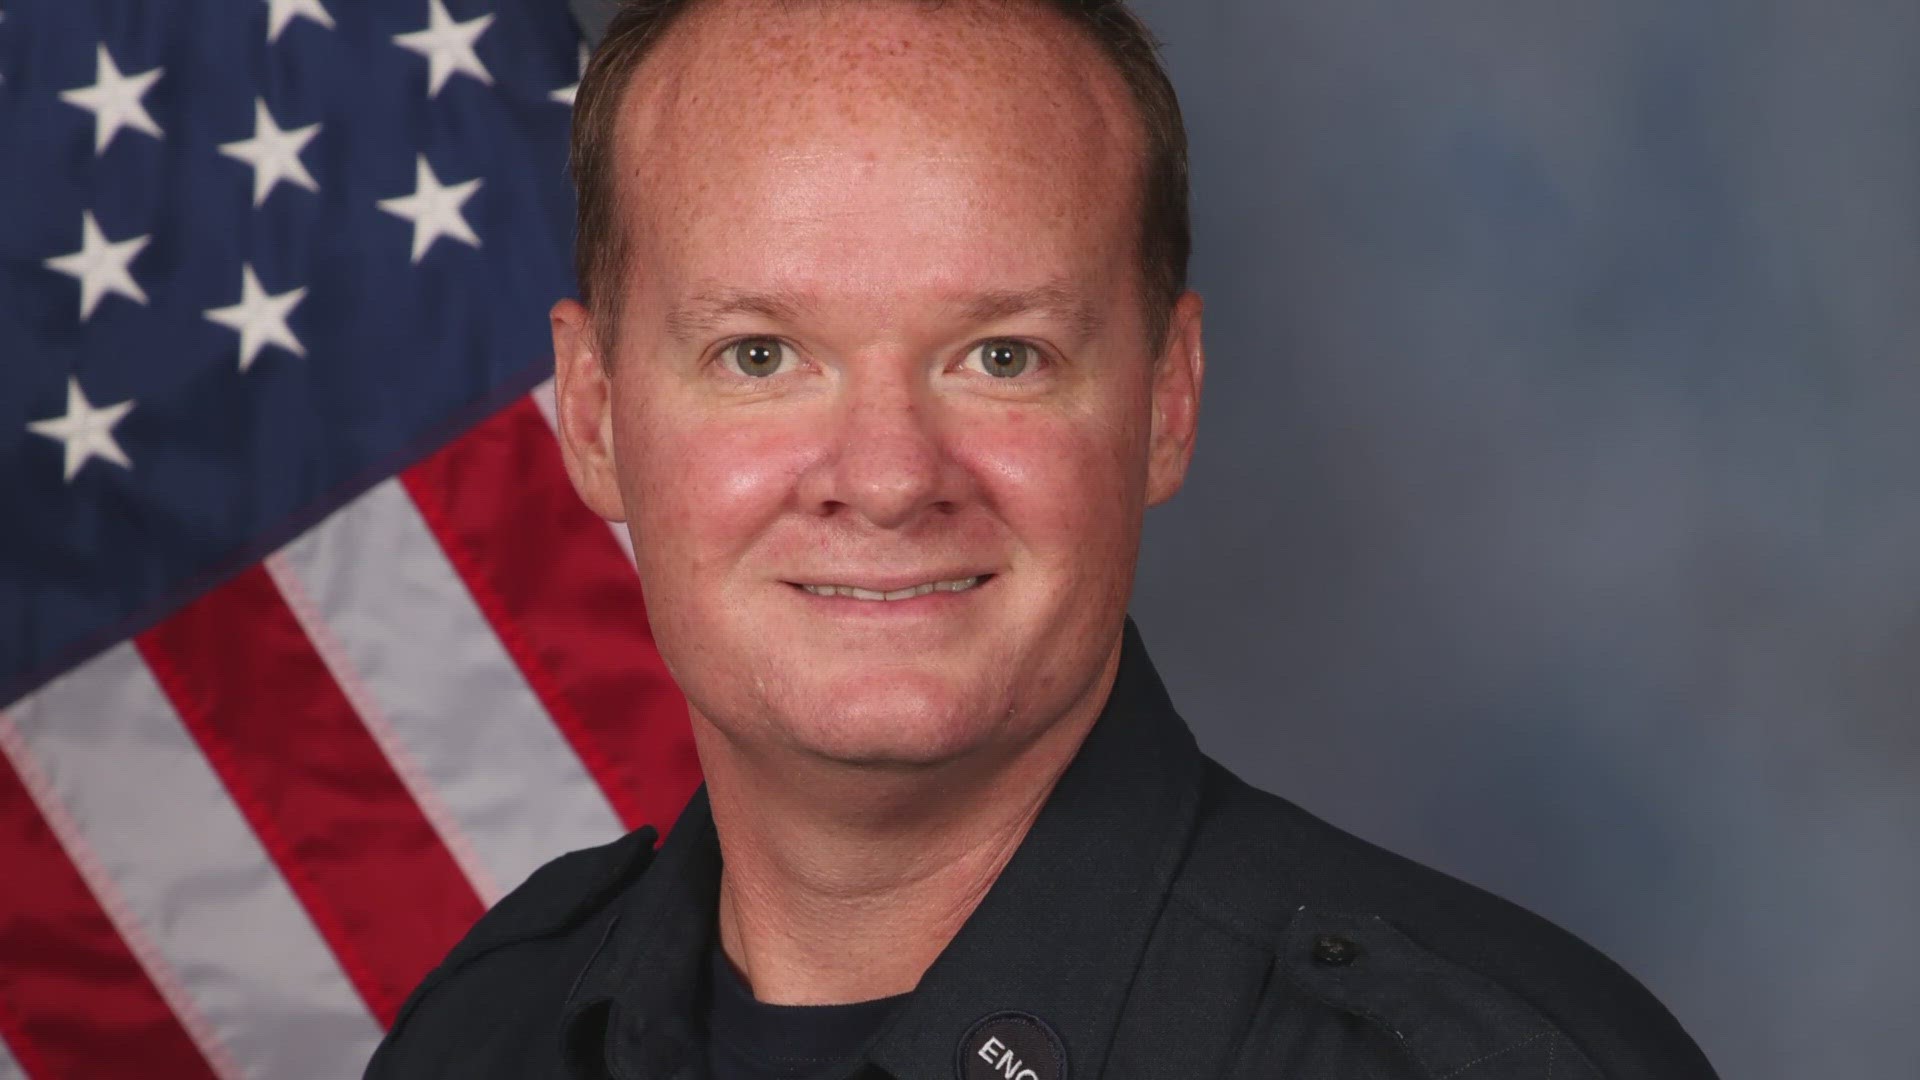 Engineer Heath J. O'Shea, 44, died after suffering from a medical emergency while on duty at Fire Station 54 Friday night.